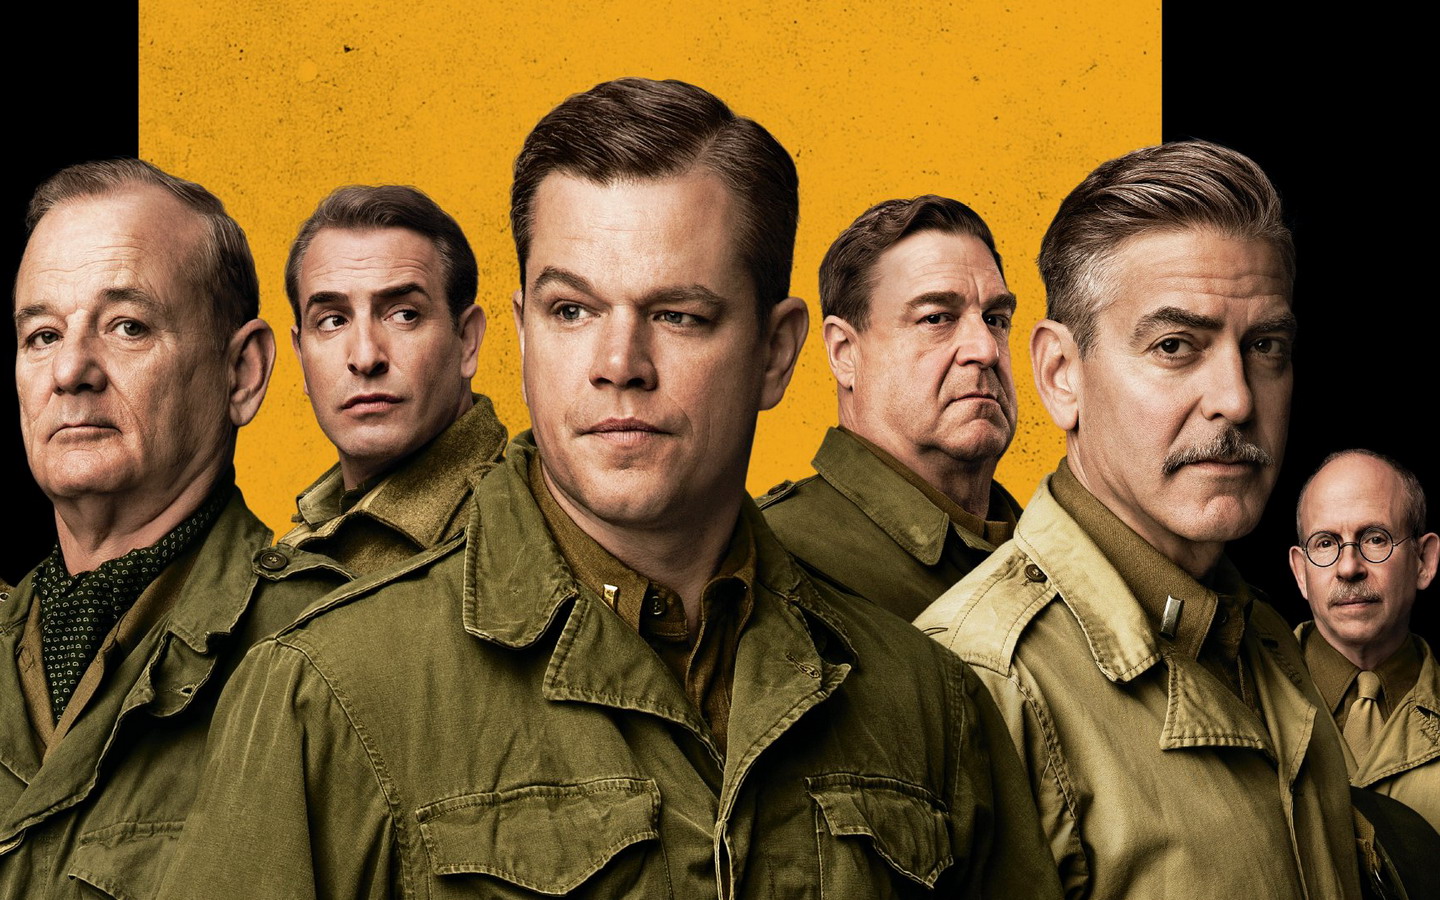 Download HQ The Monuments Men wallpaper / Movies / 1440x900